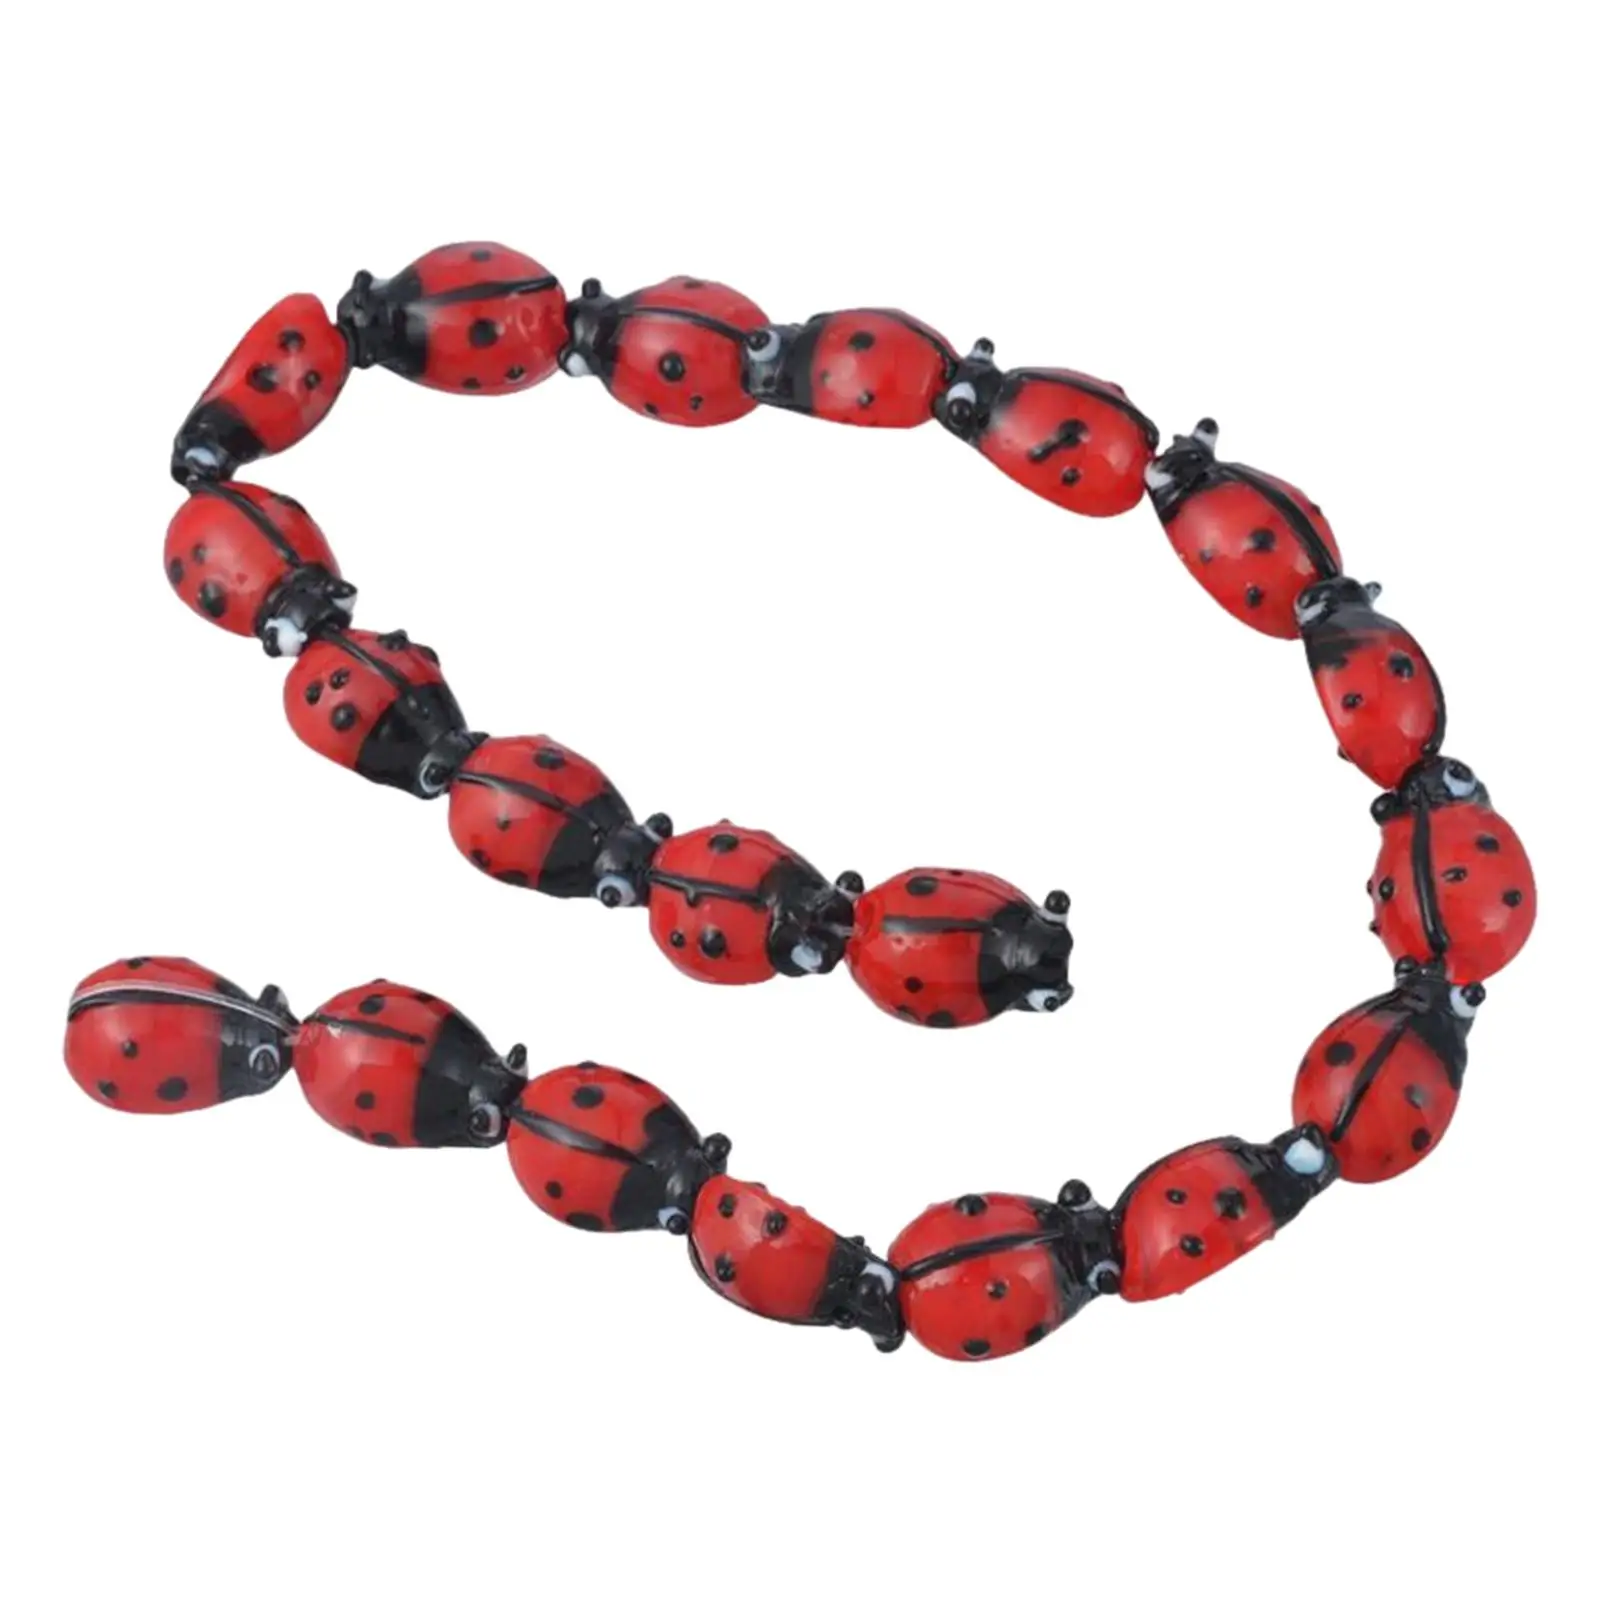 Cute Beetle Spacer Beads Kit DIY Crafts Red Accessories Supplies Small Carved for Pendant Craft Making Decoration Kids Earrings